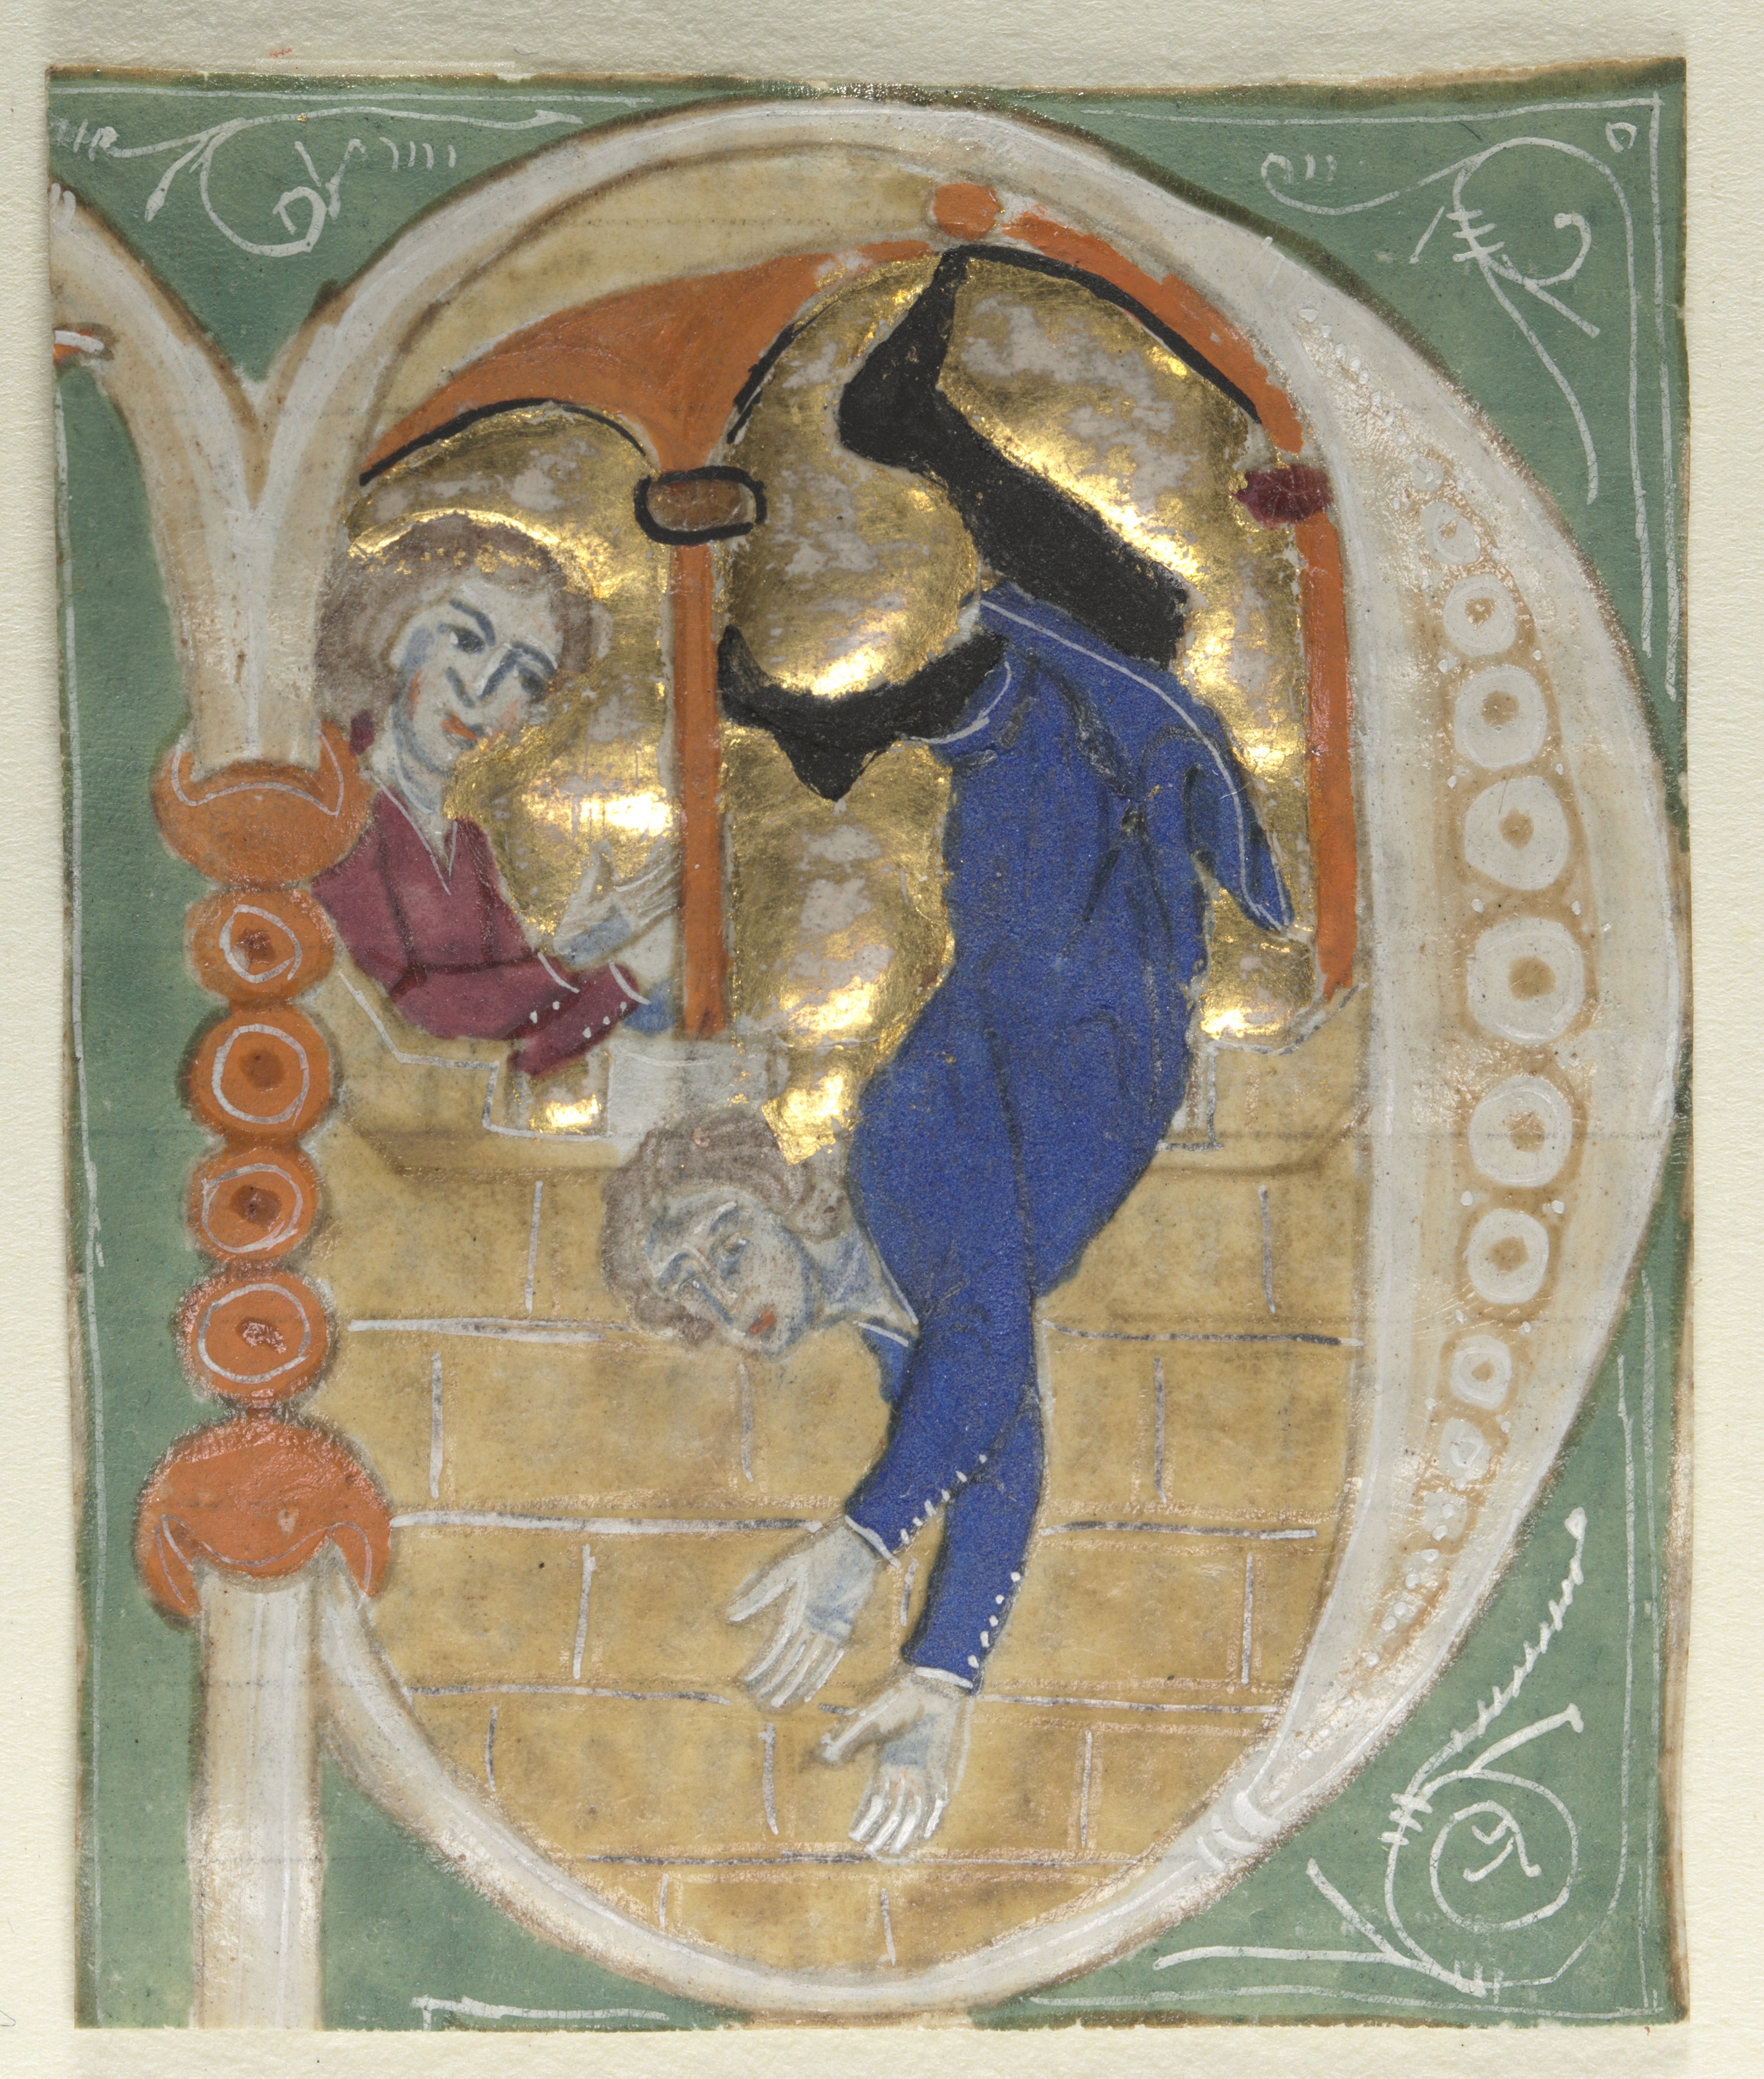 Historiated Initial (P?) Excised from a Bible